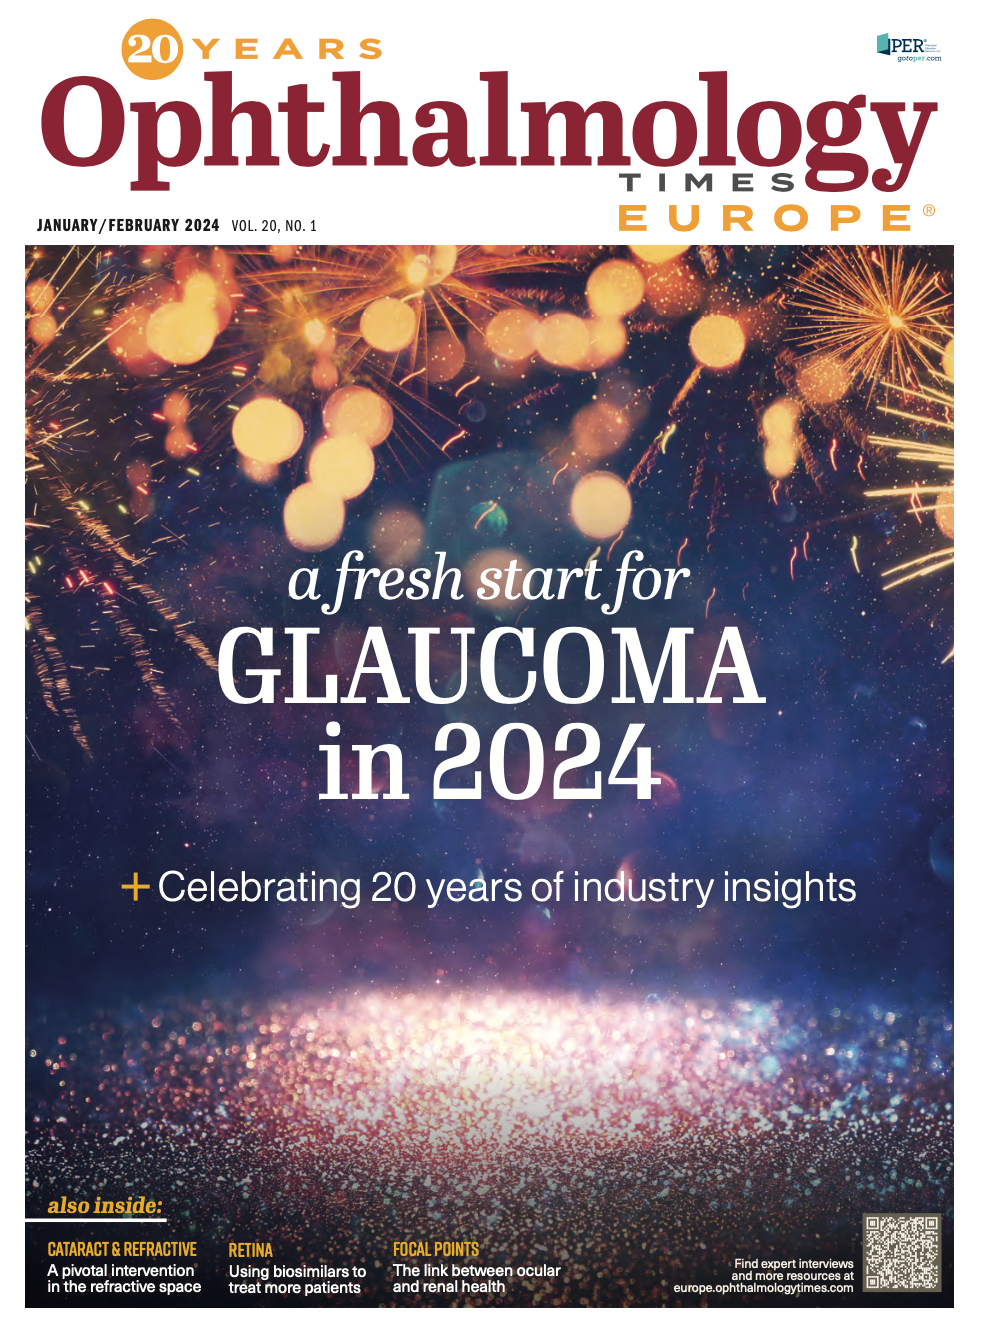 The cover of Ophthalmology Times Europe January/February 2024, which shows a spray of fireworks and the title "a fresh start for glaucoma in 2024 + celebrating 20 years of industry insights" 